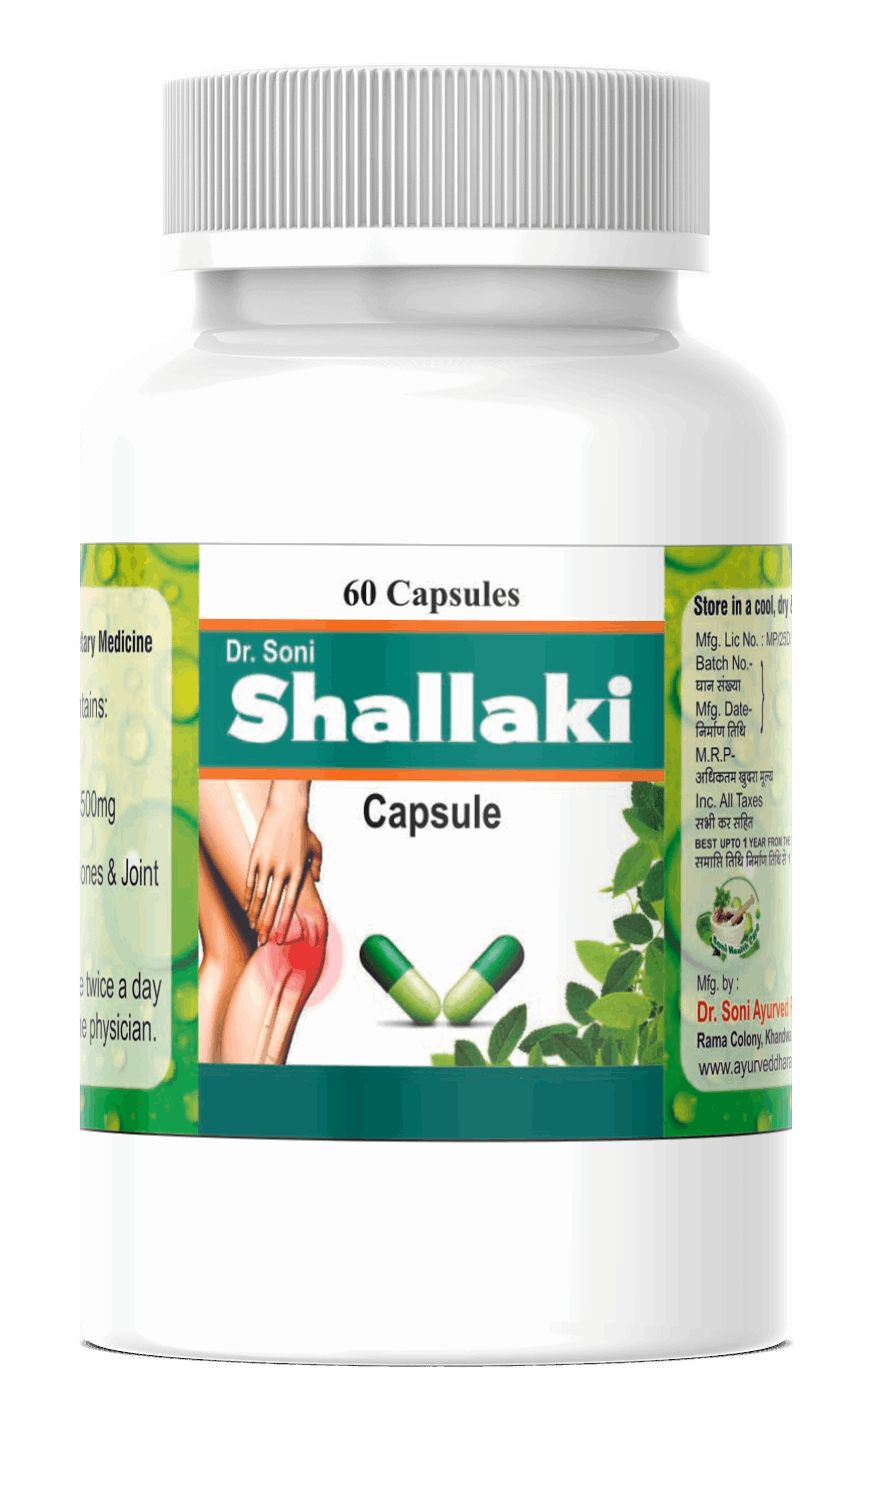 Dr. Soni Shallaki Capsules for Bone & Joint Wellness, Reduces pain and inflammation Ayurvedic Capsule 500 Mg, (60 Veg Capsules),Shallaki Extract Capsules,shallaki capsule,shallaki,Relieves Joint Pain,Reduce Swelling in joints,Powerful antioxidant,Pain Killer,Normal Functioning of the Joints,Muscular Pain,benefits of shallaki,Arthritis & Rheumatoid Arthritis Pain,Antipyretic,Antioxidants,Anti-inflammatory, Dr. Soni Shallaki Capsules for Bone & Joint Wellness